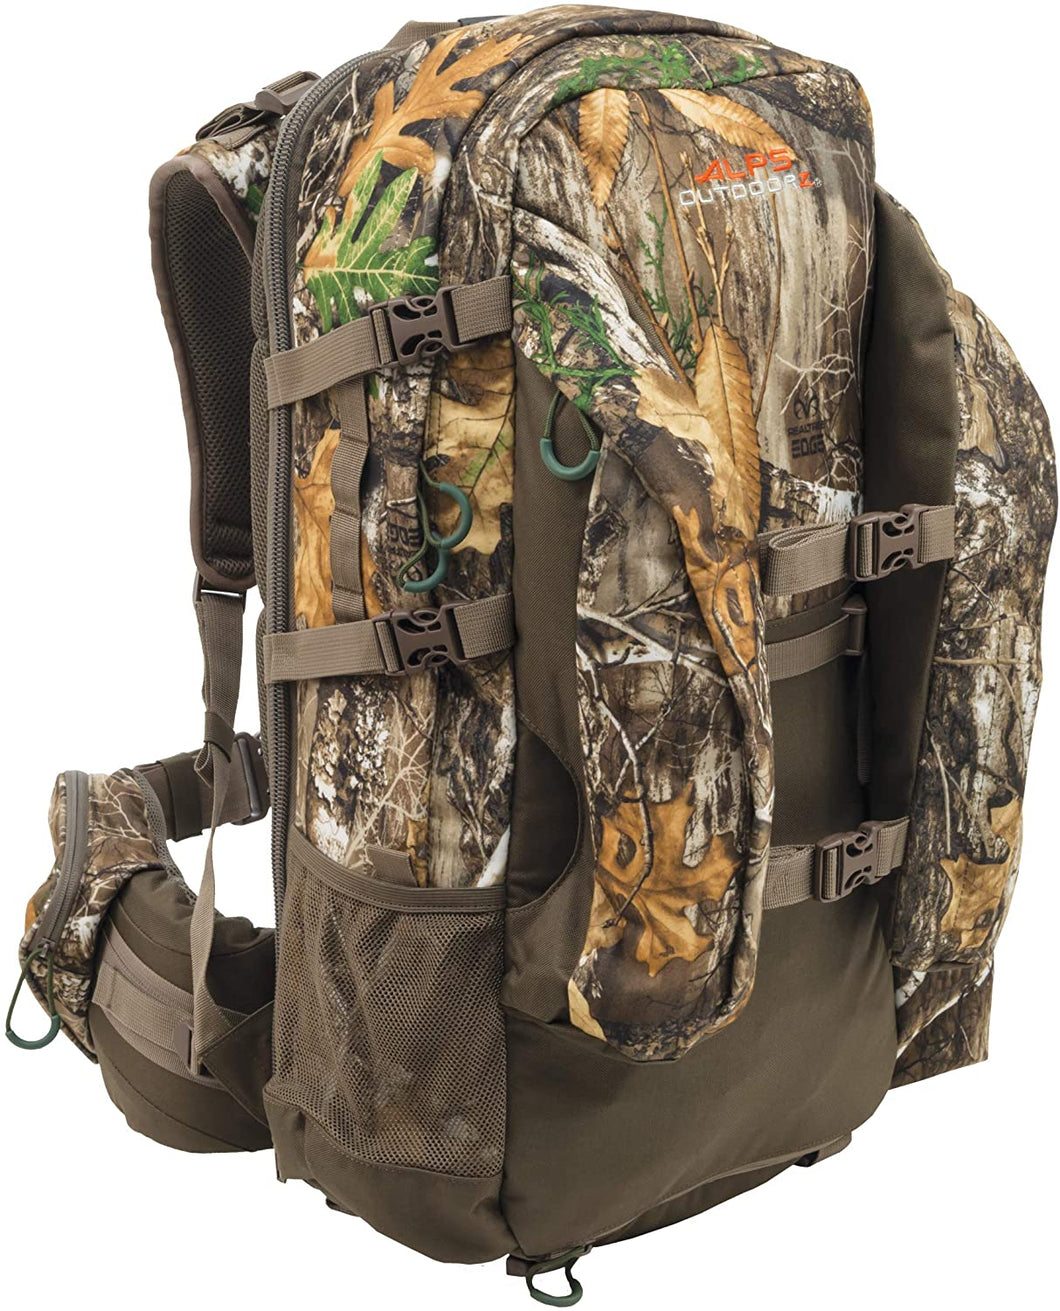 ALPS OutdoorZ Traverse EPS Hunting Pack, Realtree Edge - AL9465100